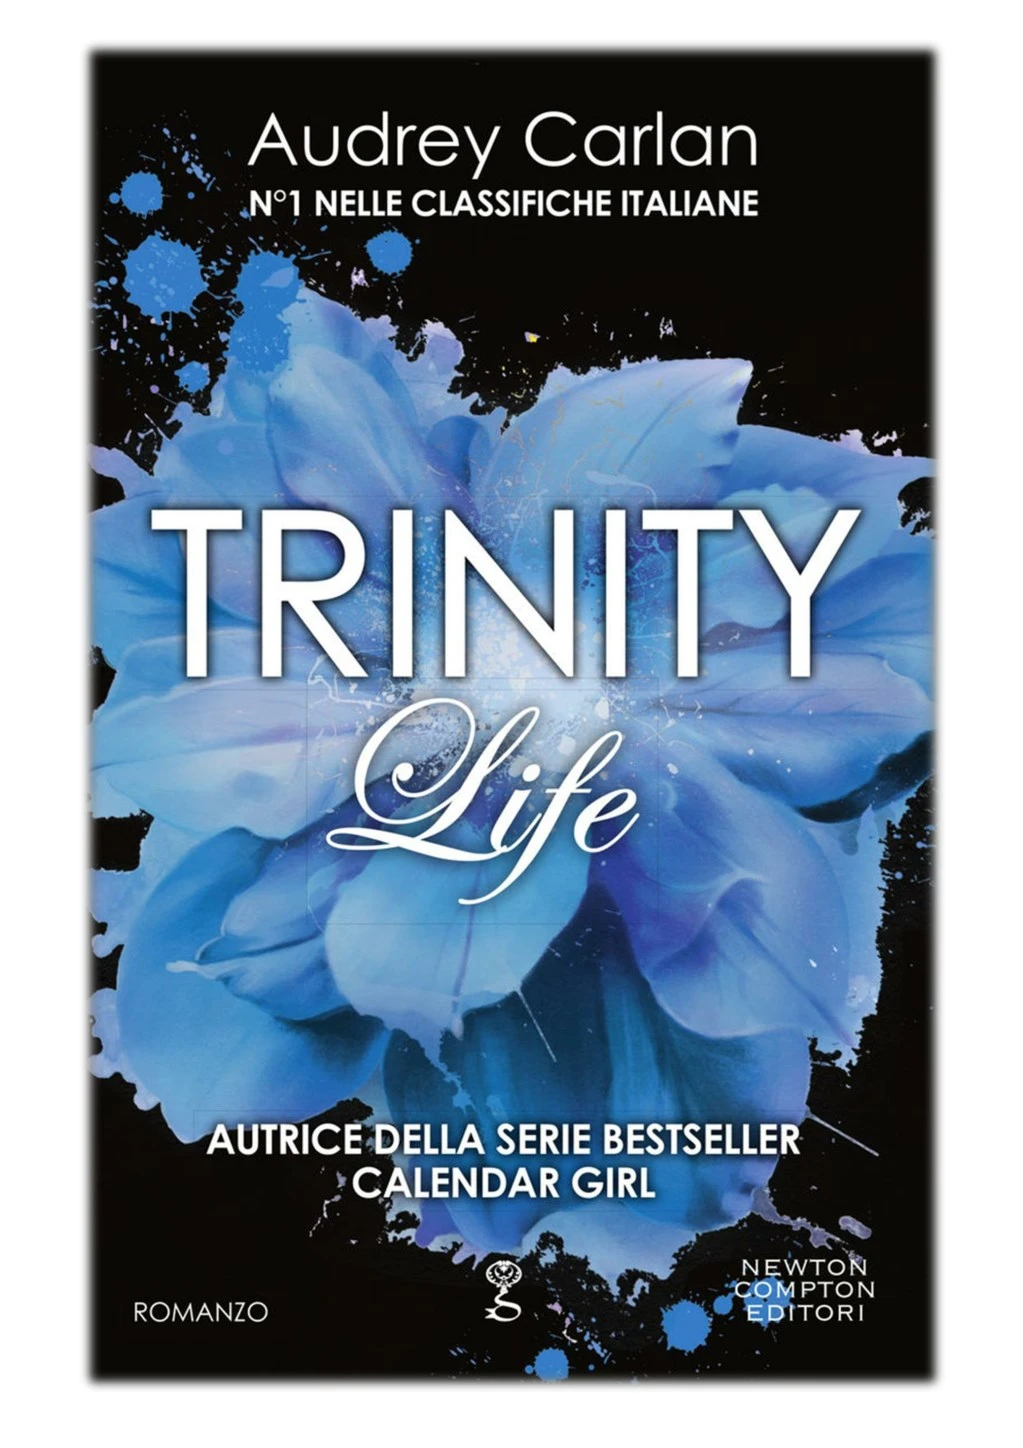 Ppt Pdf Free Download Trinity Life By Audrey Carlan Powerpoint Presentation Id